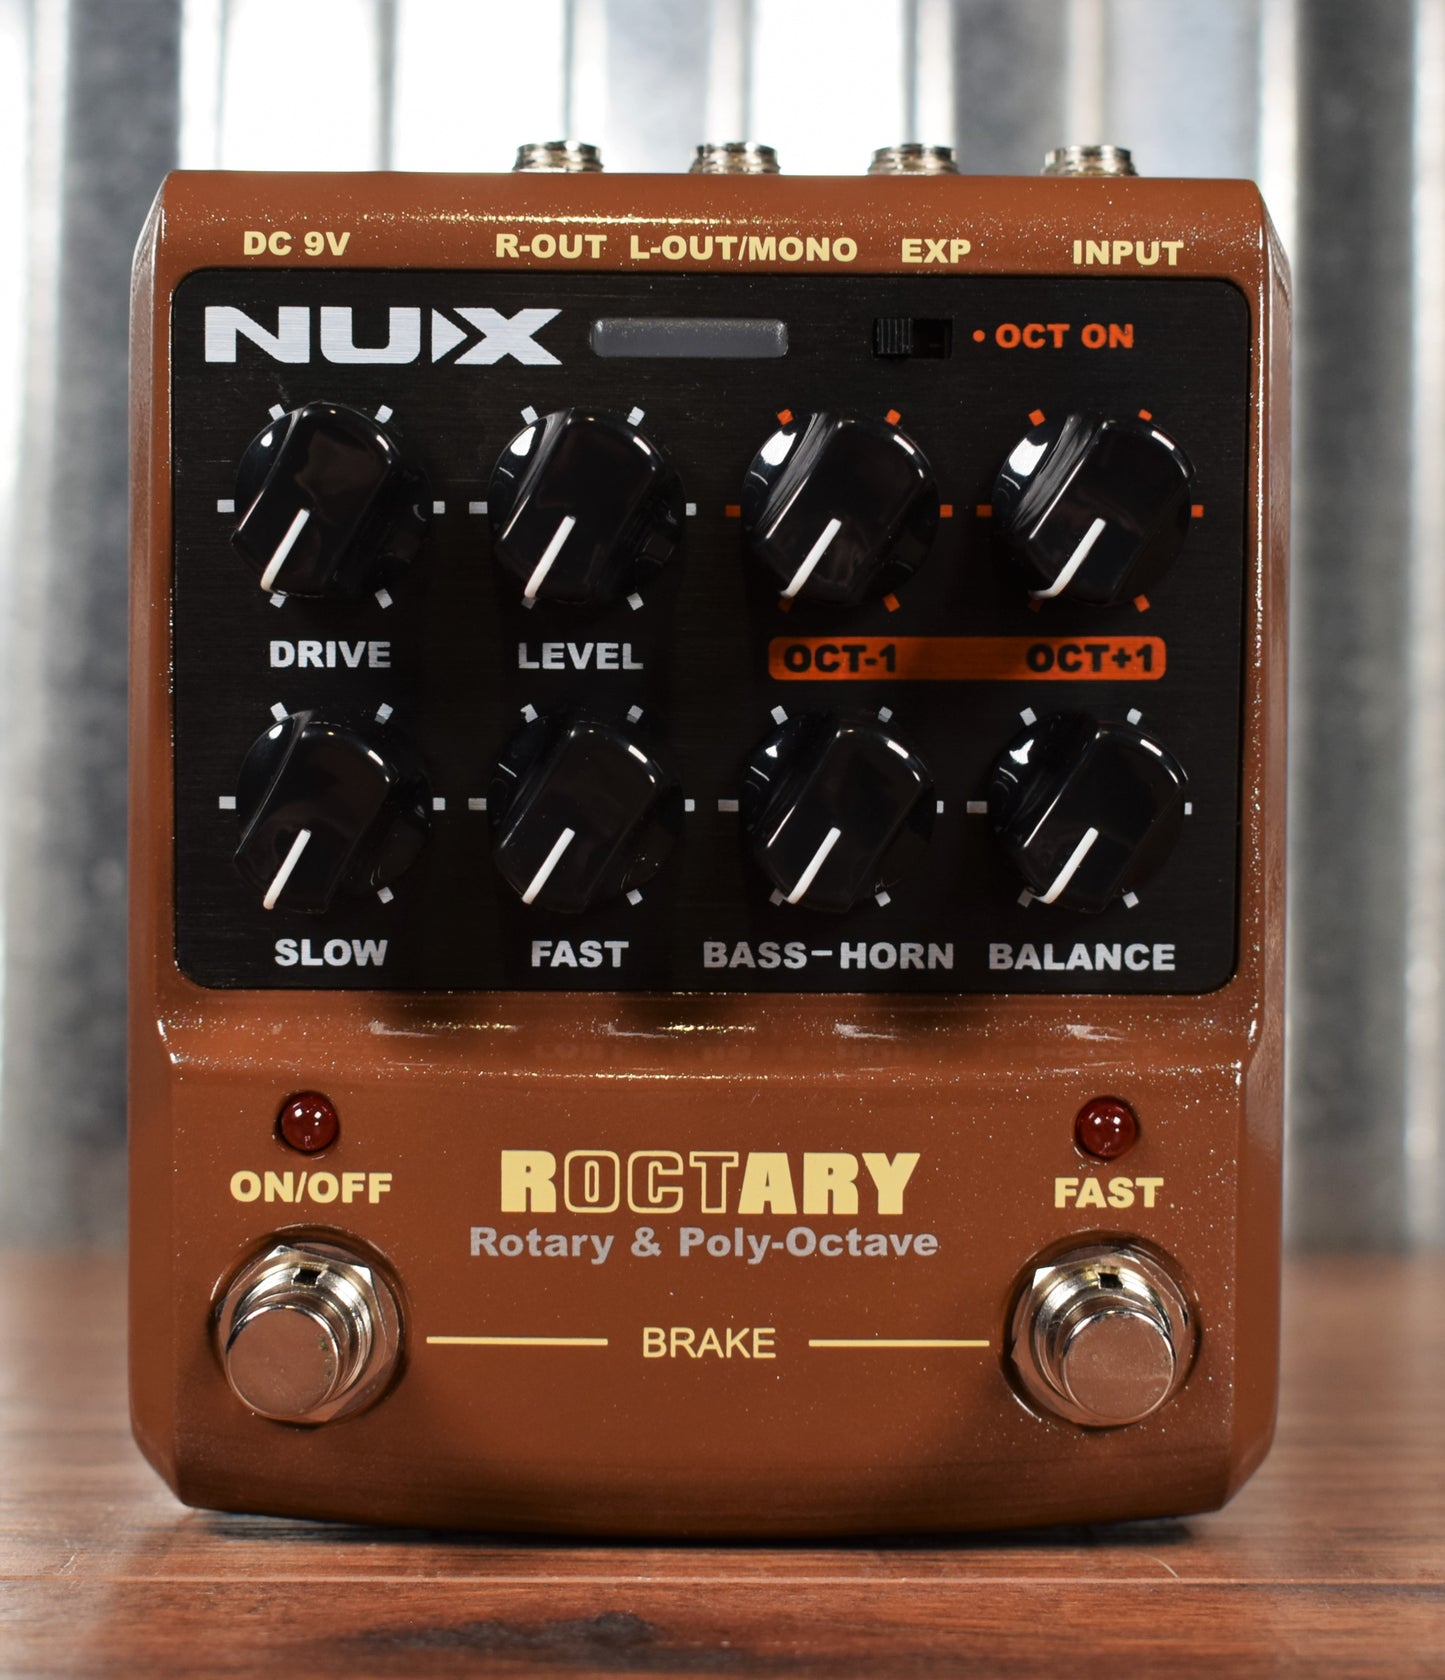 NUX Roctary Rotary Speaker & Polyphonic Octave Guitar Effect Pedal